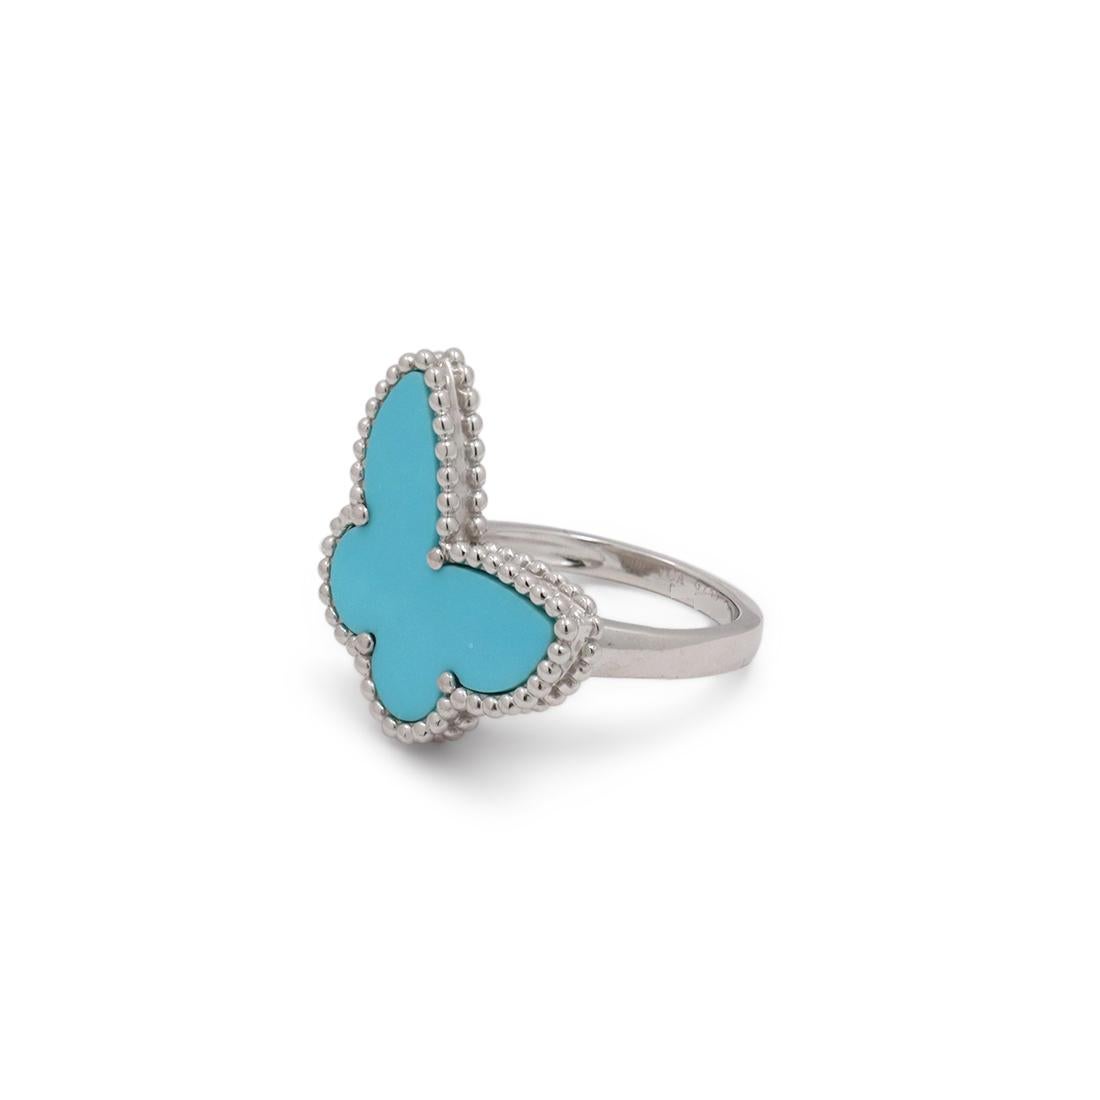 Authentic Van Cleef & Arpels 'Lucky Alhambra' ring crafted in 18 karat white gold and featuring a turquoise butterfly motif. Signed VCA, Au750 with serial number. Ring size 50 (US 5 1/4). The ring is presented with the original Van Cleef & Arpels